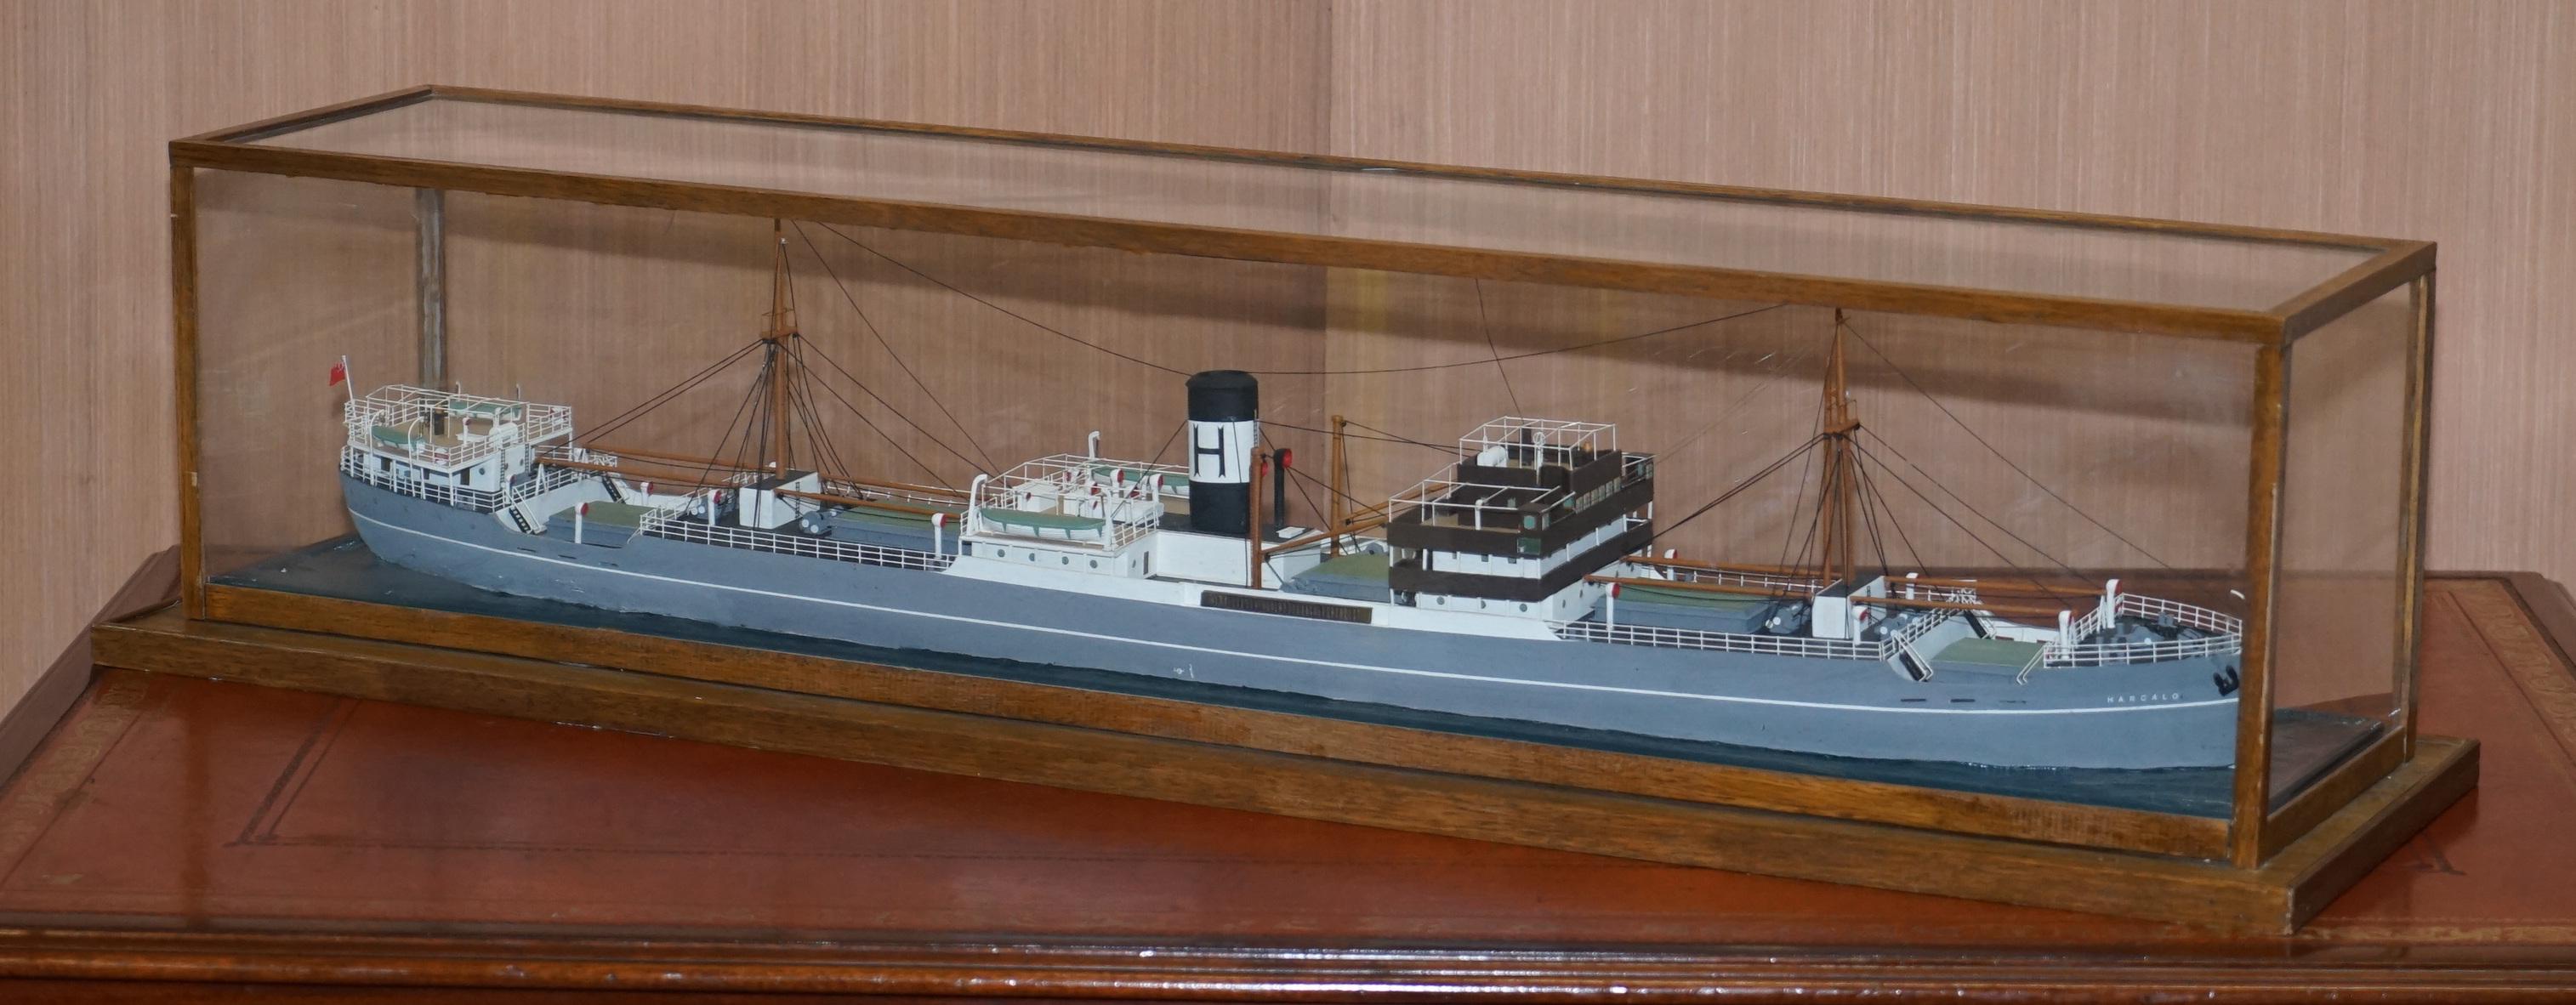 We are delighted to offer for sale this stunning hand made model ship in original display case of the S.S Harcalo Steam cargo ship, 1895-1907

This piece is one of four large scales model ships I have for sale, the others are all listed under my